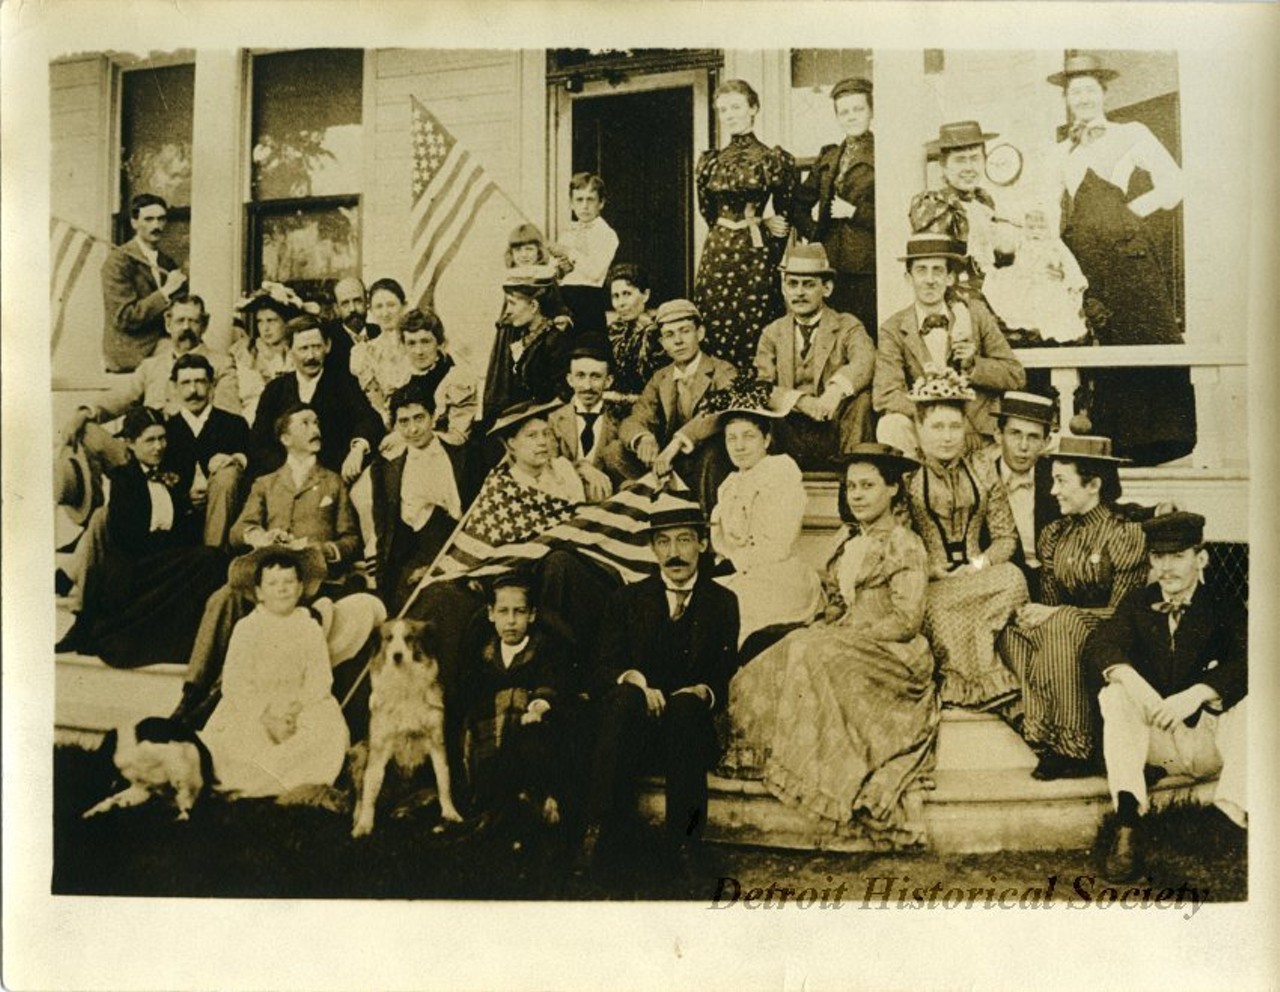 "Sepia-toned group photograph taken of people sitting and standing on the porch of the home of Mr. and Mrs. George H. Russel in Grosse Pointe for a Fourth of July celebration. Several people are holding American flags. On the verso is a handwritten description "Picture taken July 4, 1891 on porch of house of Mr. & Mrs. George H. Russel, Grosse Pointe," along with the names of the people in the photograph: "Mr. & Mrs. E. A. Sumner, Charles B. King, Alice King, Madeline King, Bessie Wright, Mr. & Mrs. W. K. Anderson, Mr. & Mrs. John R. Russel, Miss Sarah Russel, Miss Anne D. Russel, Edward A. Sumner Jr., Anna Sumner, Mrs. James J. Shaw, George B. Russel, Albert Russel, Sallie Russel, Philip Russel, Raymond Russel, Catherine Russel, Francis Russel, Marian Russel, James A. Venable, Anne Anderson, Pally Anderson, Sue Anderson, Louis B. Wright, Catherine Clark Anderson, Bessie Venable, Walter Brandon, Mr. & Mrs. George H. Russel, George L. Courtney.""